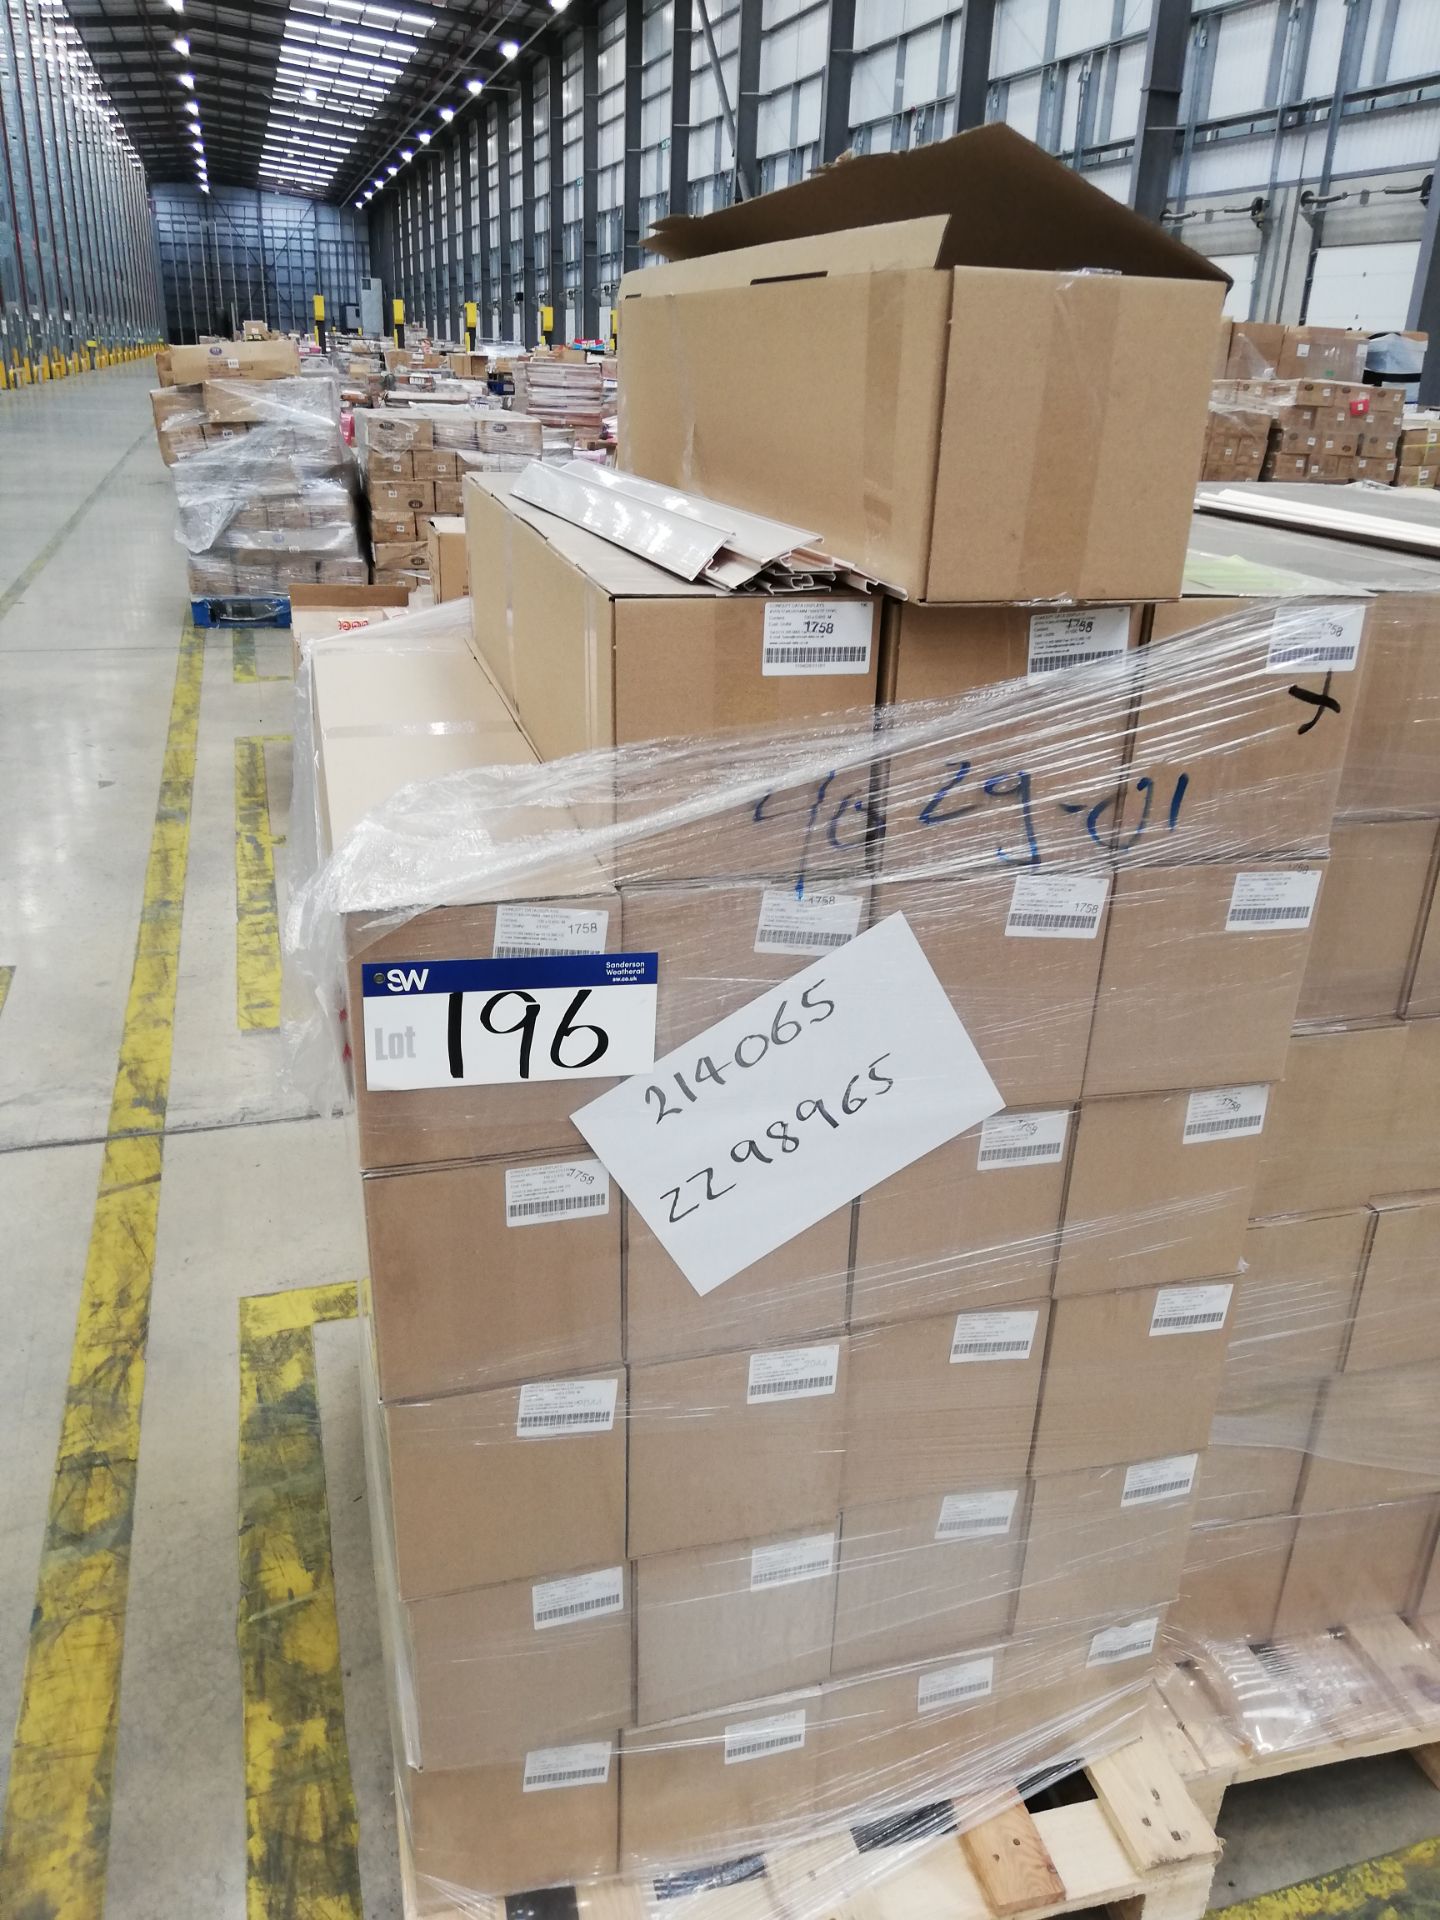 32 x Boxes of Concept Date Displays Dura White Pla